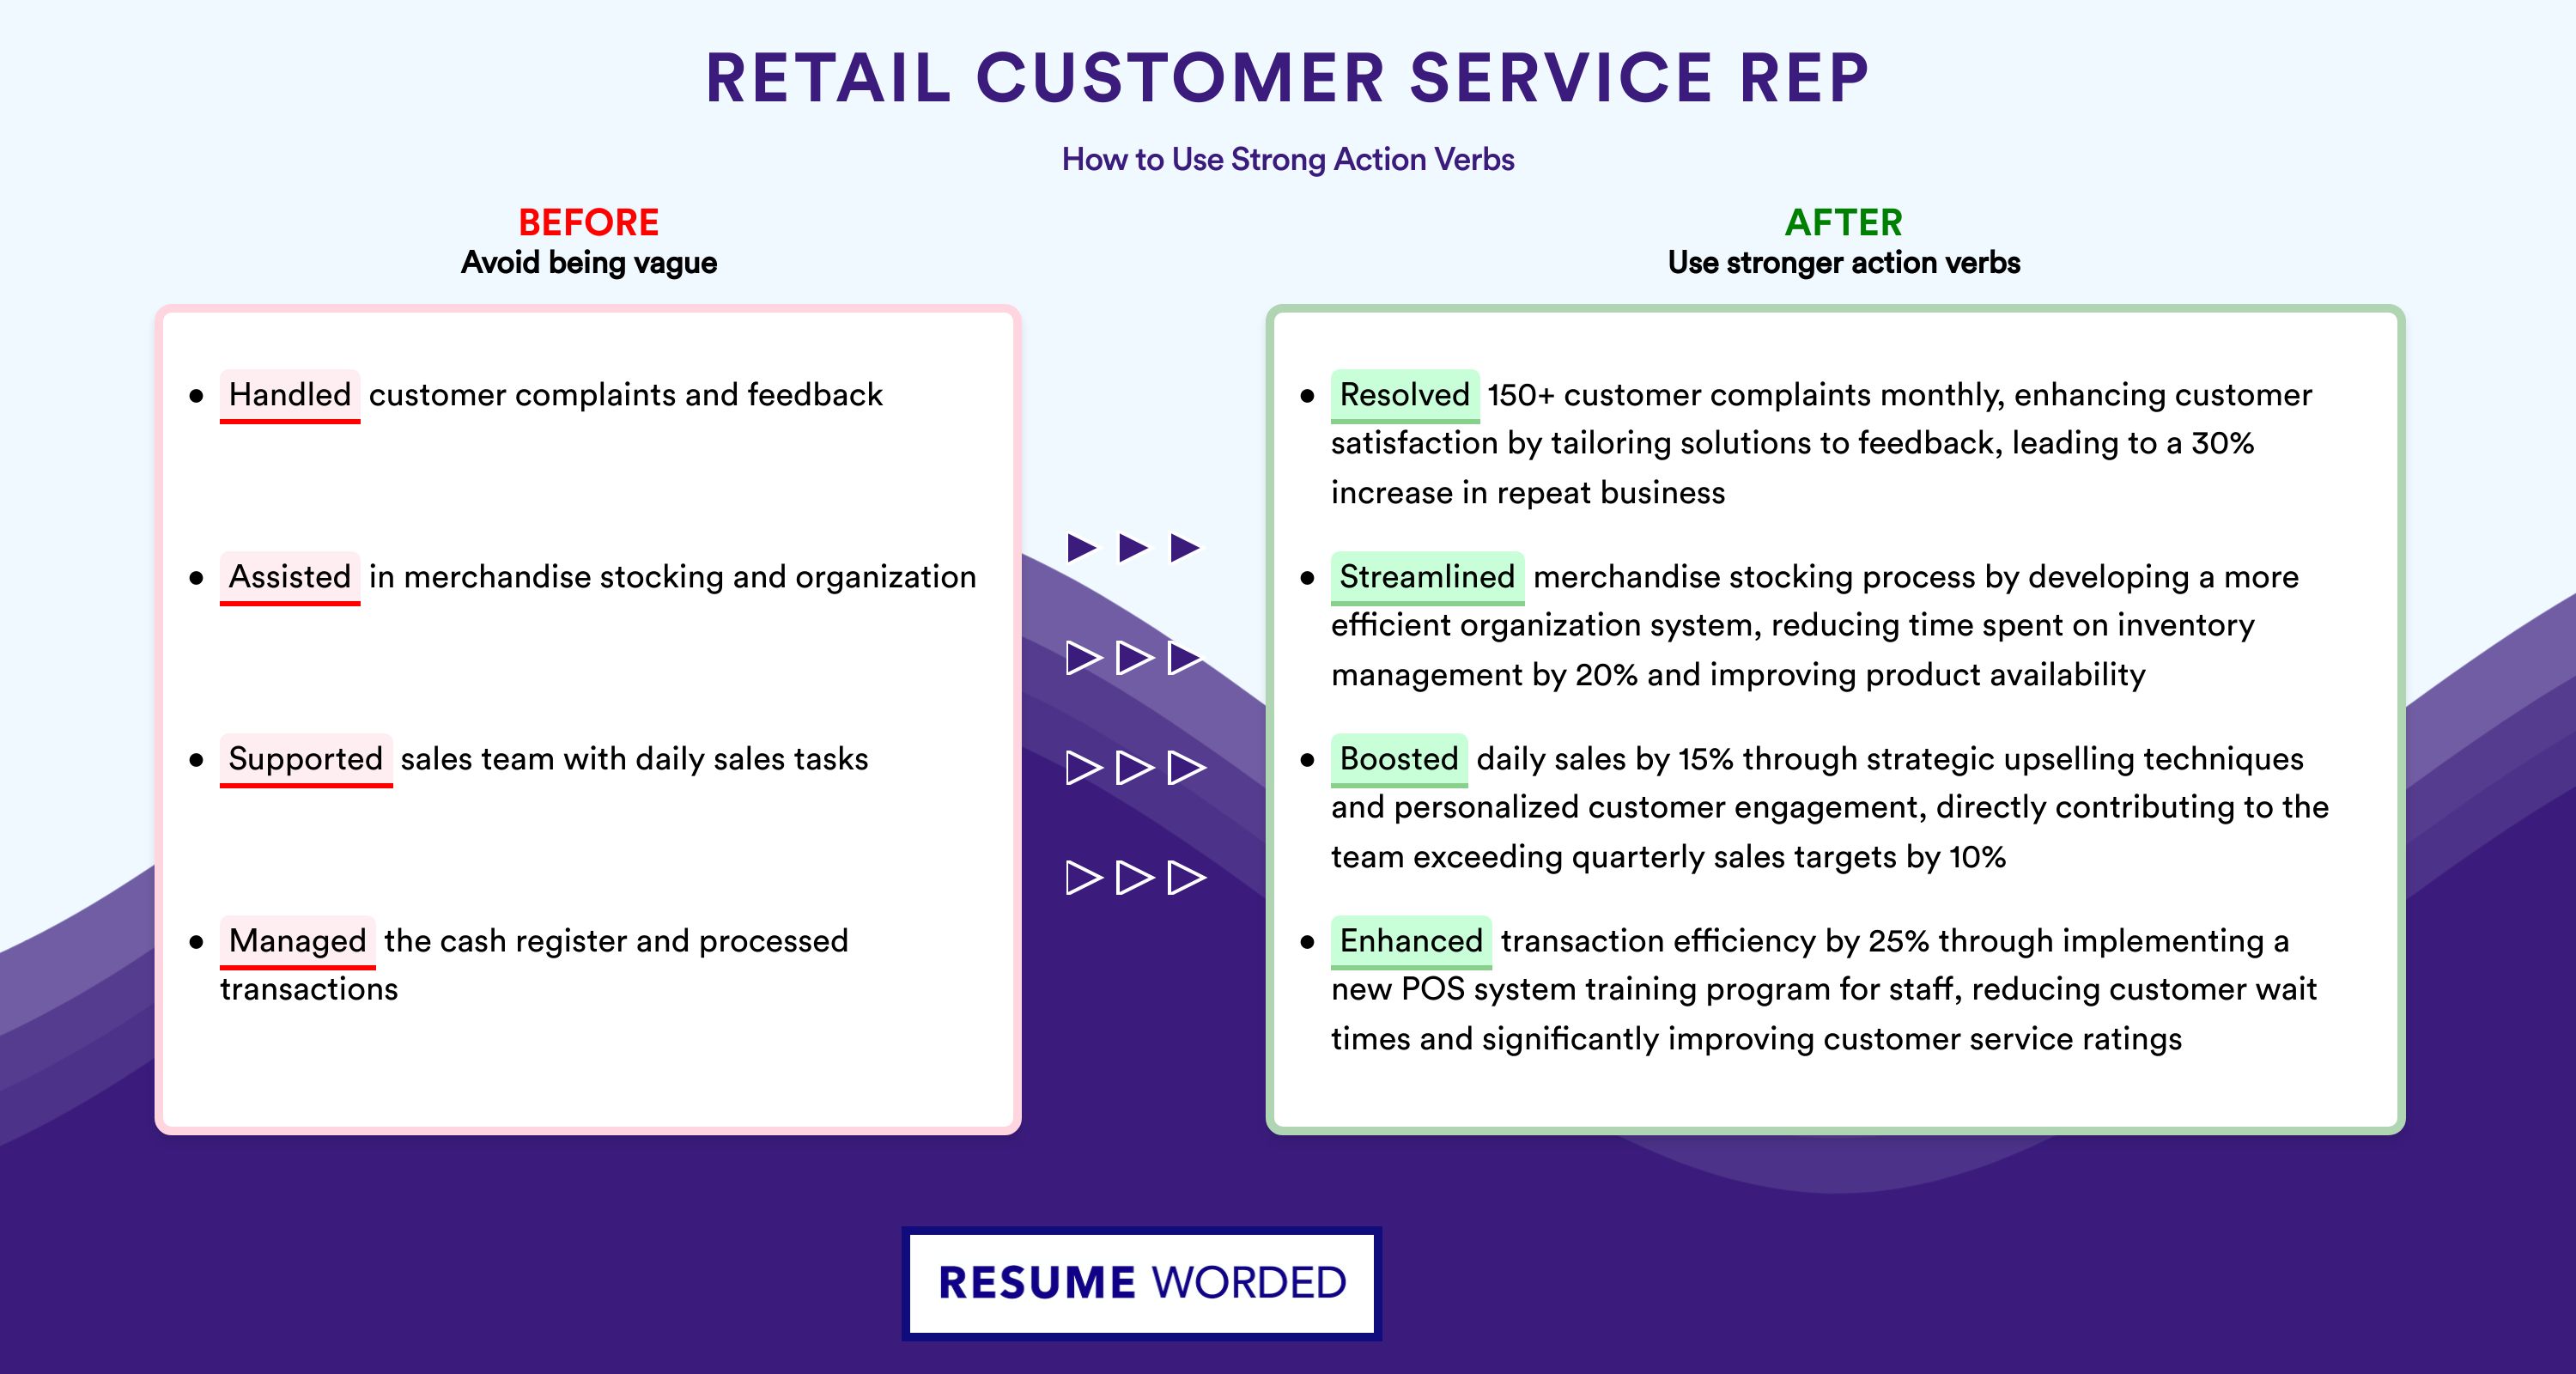 Action Verbs for Retail Customer Service Rep